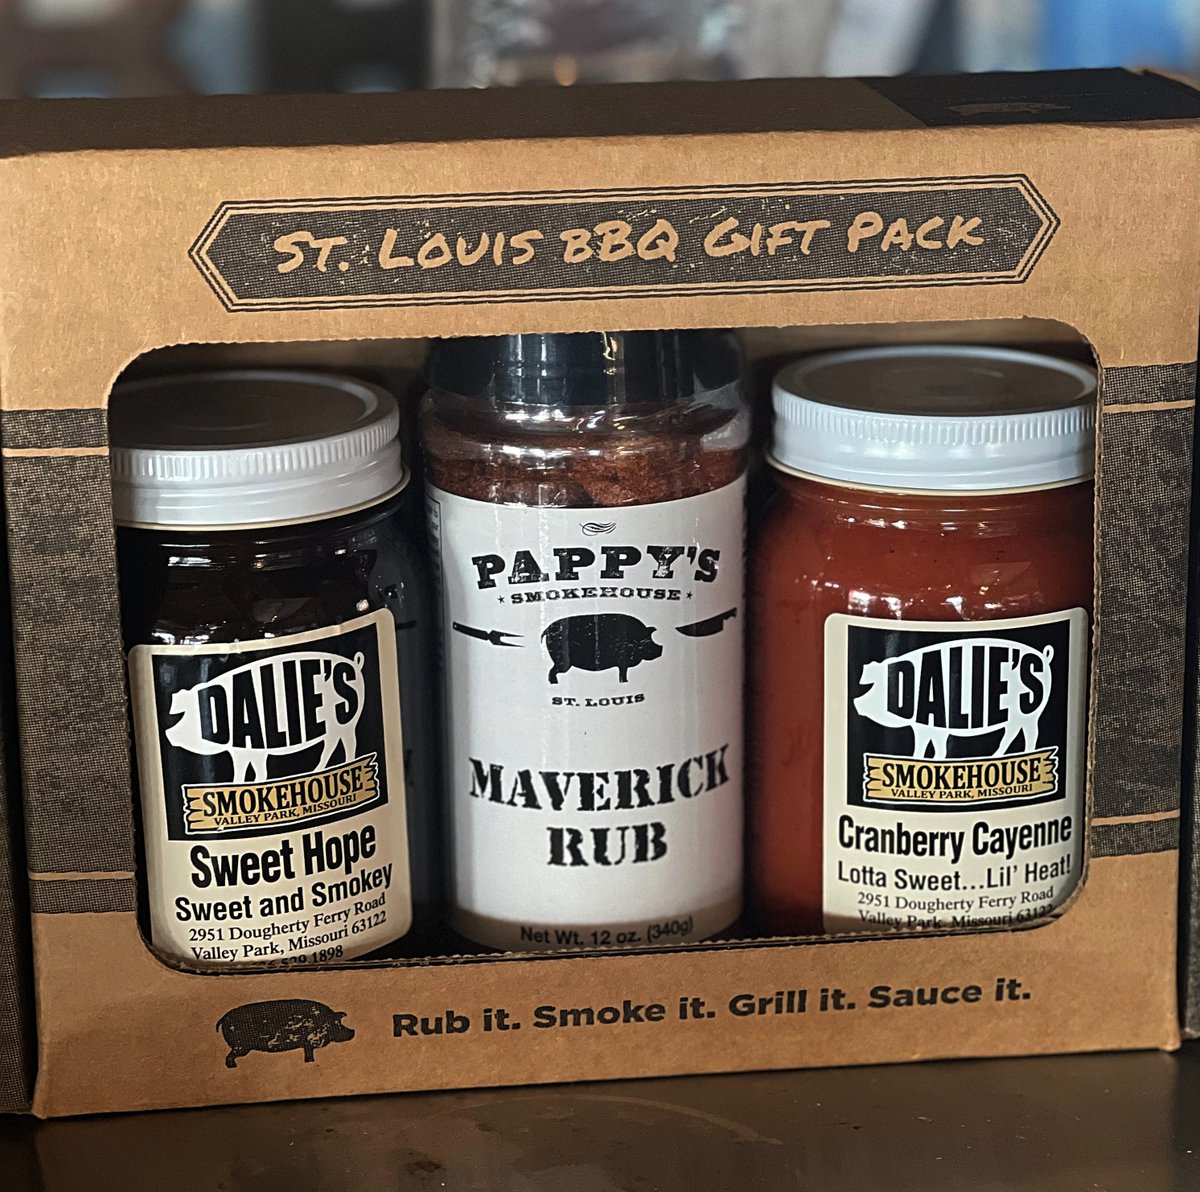 🚨NEW!🚨 Grab a Dalie's BBQ GIFT PACK. It's the perfect gift for the barbecue enthusiasts on your list! 🔥🎁🎄 Our gift pack includes 2 sauces and 1 rub for $21.99. Available at the register. #daliessmokehouse #bbq #bbqgifts #bbqsauce #bbqrub #shopsmall #buylocal #shoplocal